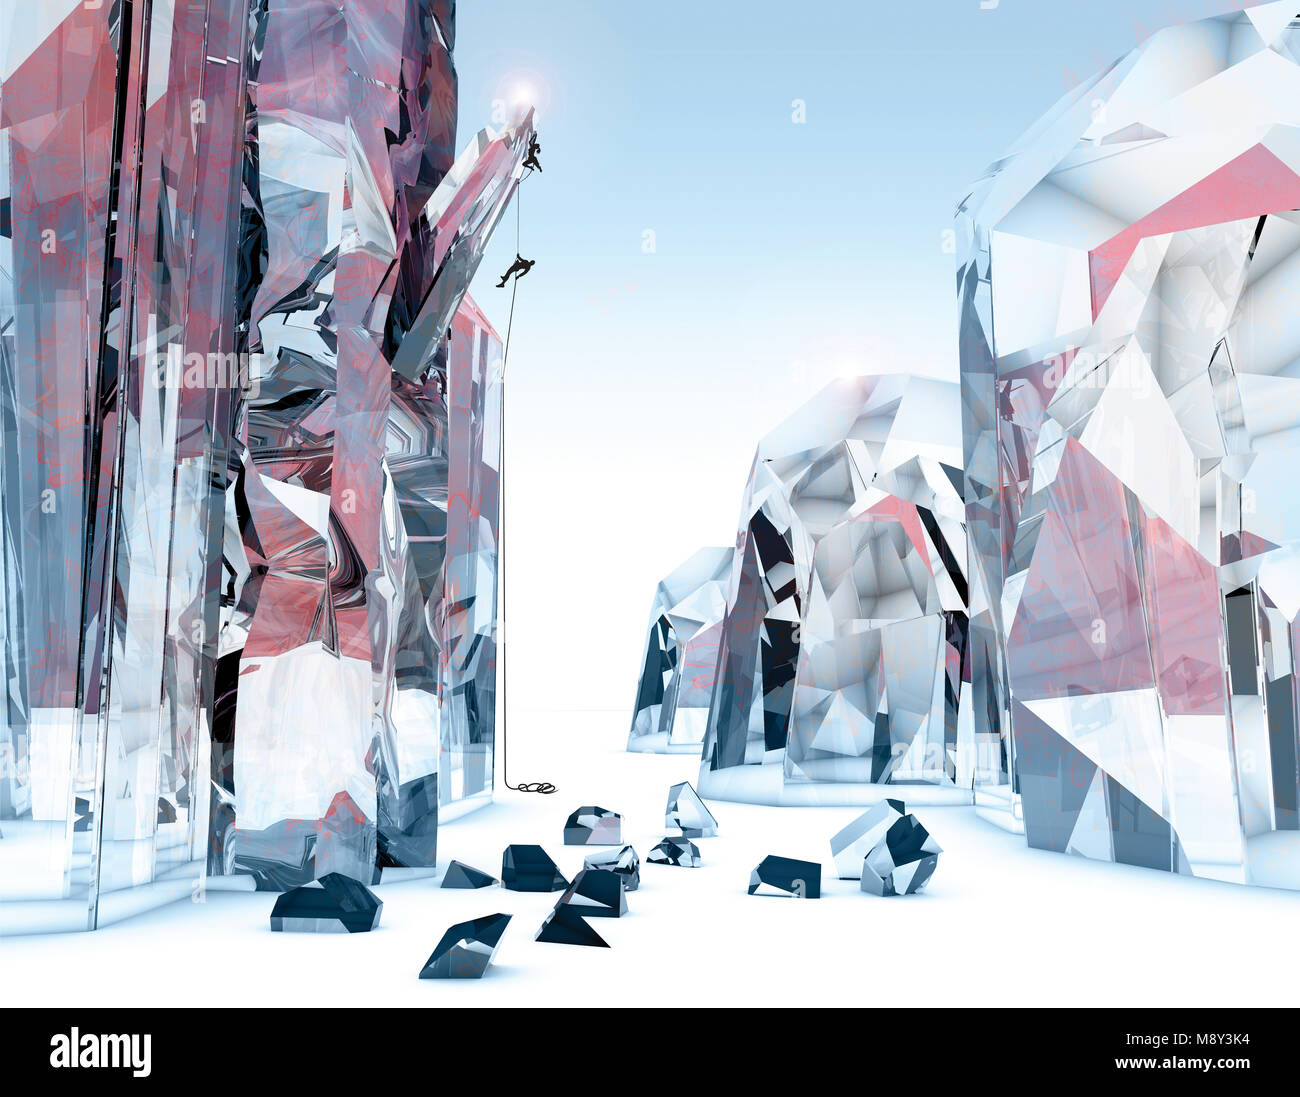 People climbing on a giant crystal, fantastic world. Science fiction landscape. 3d rendering Stock Photo